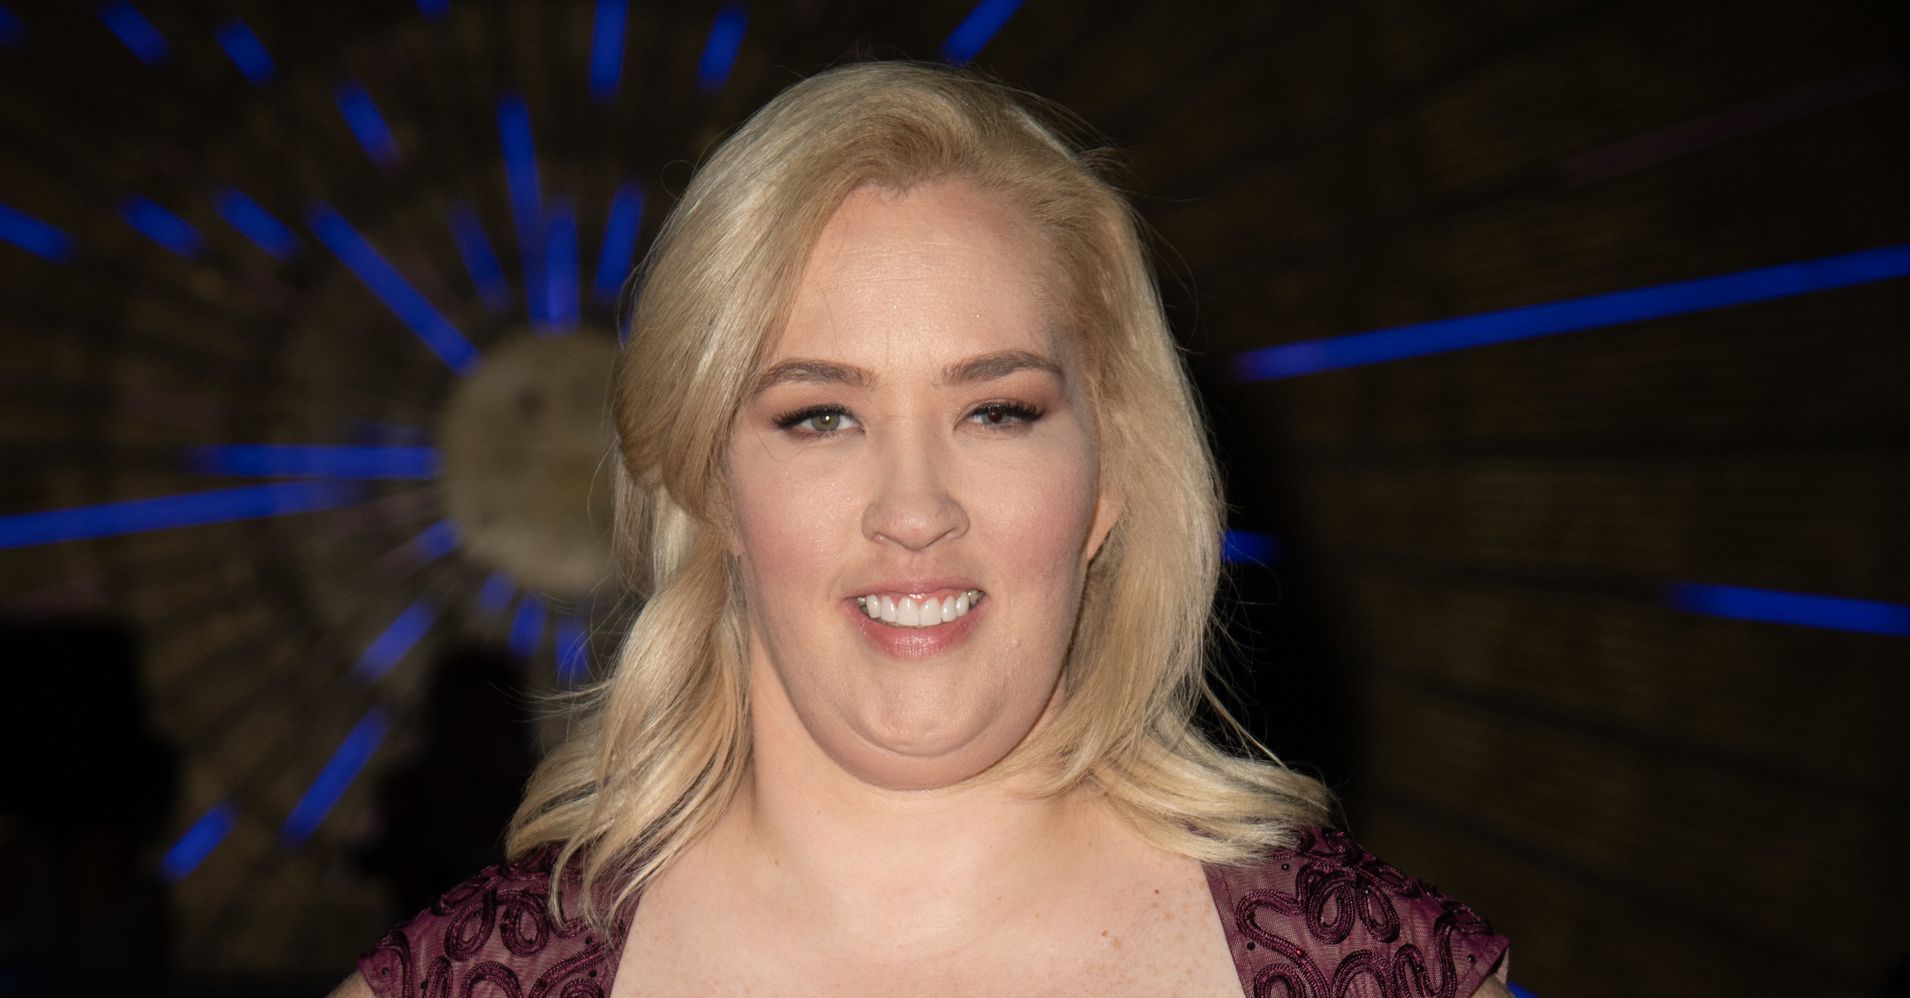 Honey Boo Boos Mother Mama June Arrested On Drug Possession Charges Huffpost